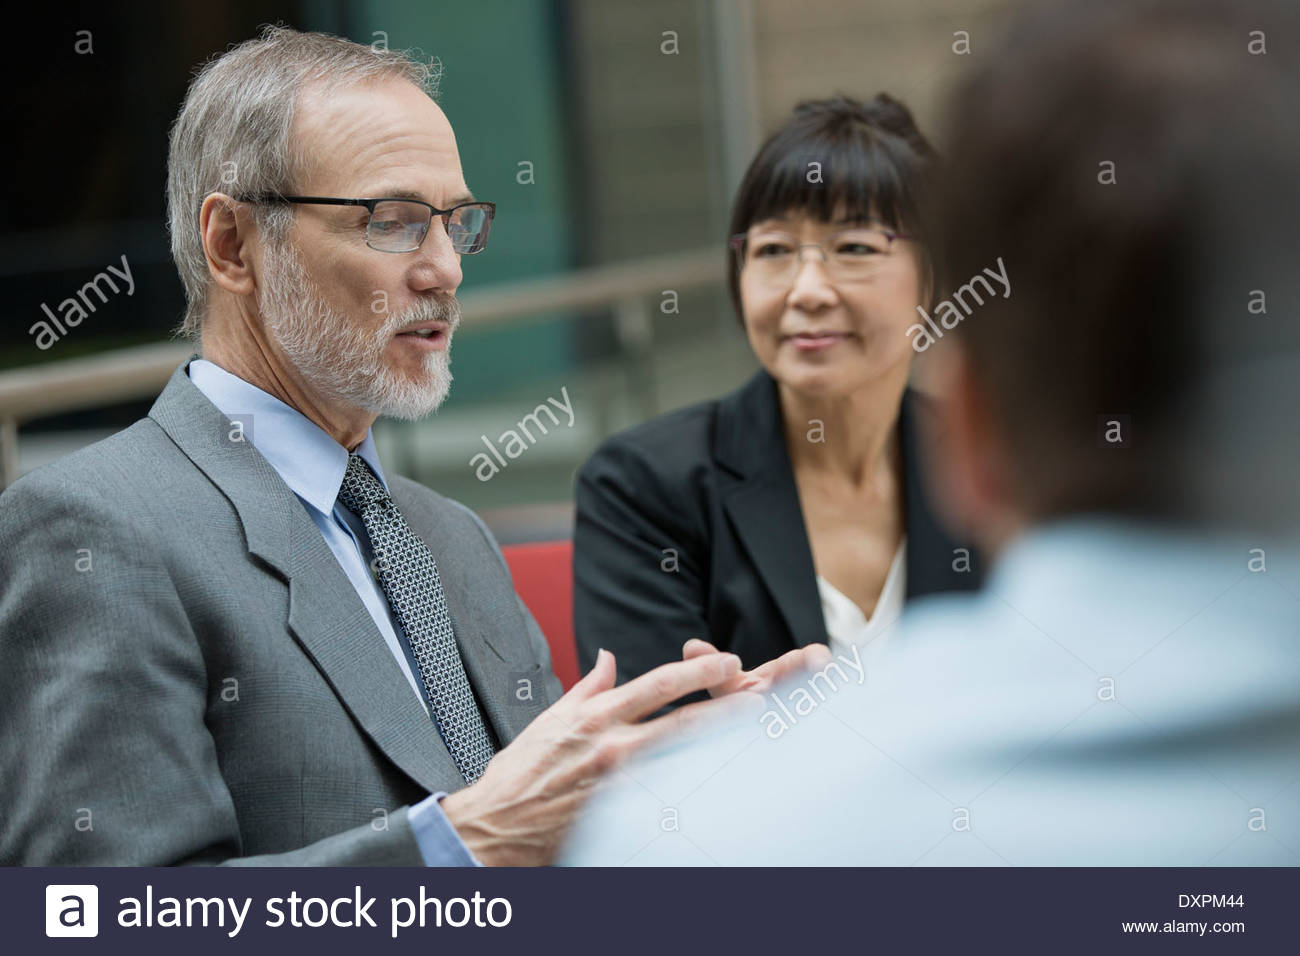 Businessman gesturing in meeting Banque D'Images